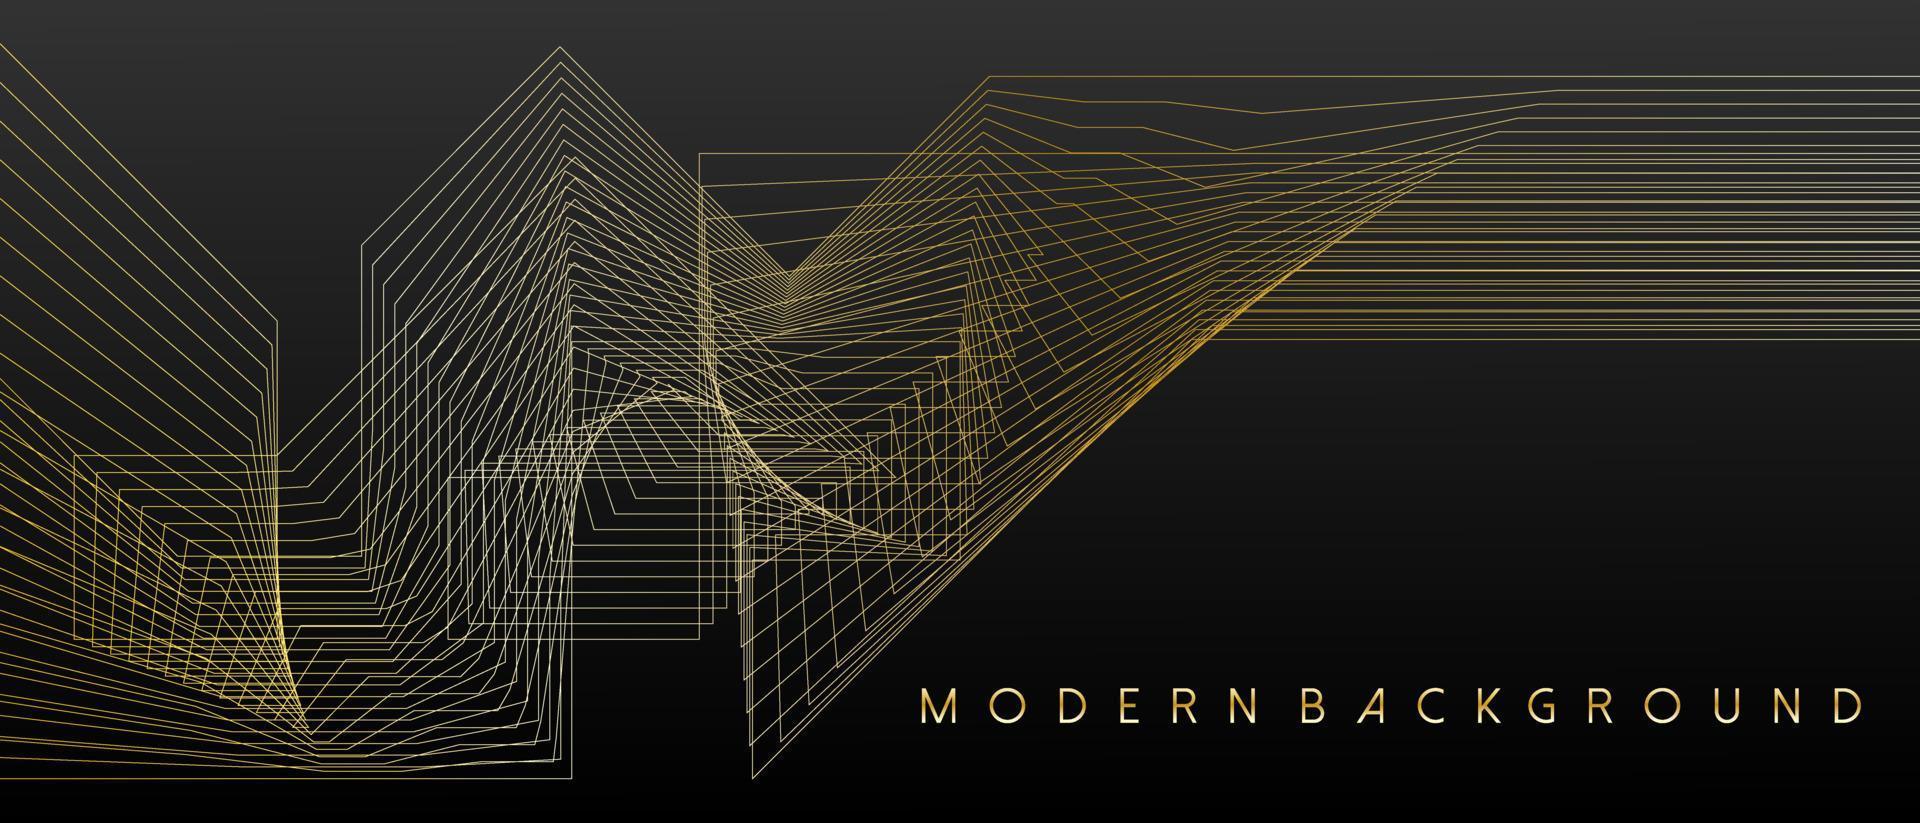 Modern background with golden abstract geometric and wavy lines design. Vector illustration